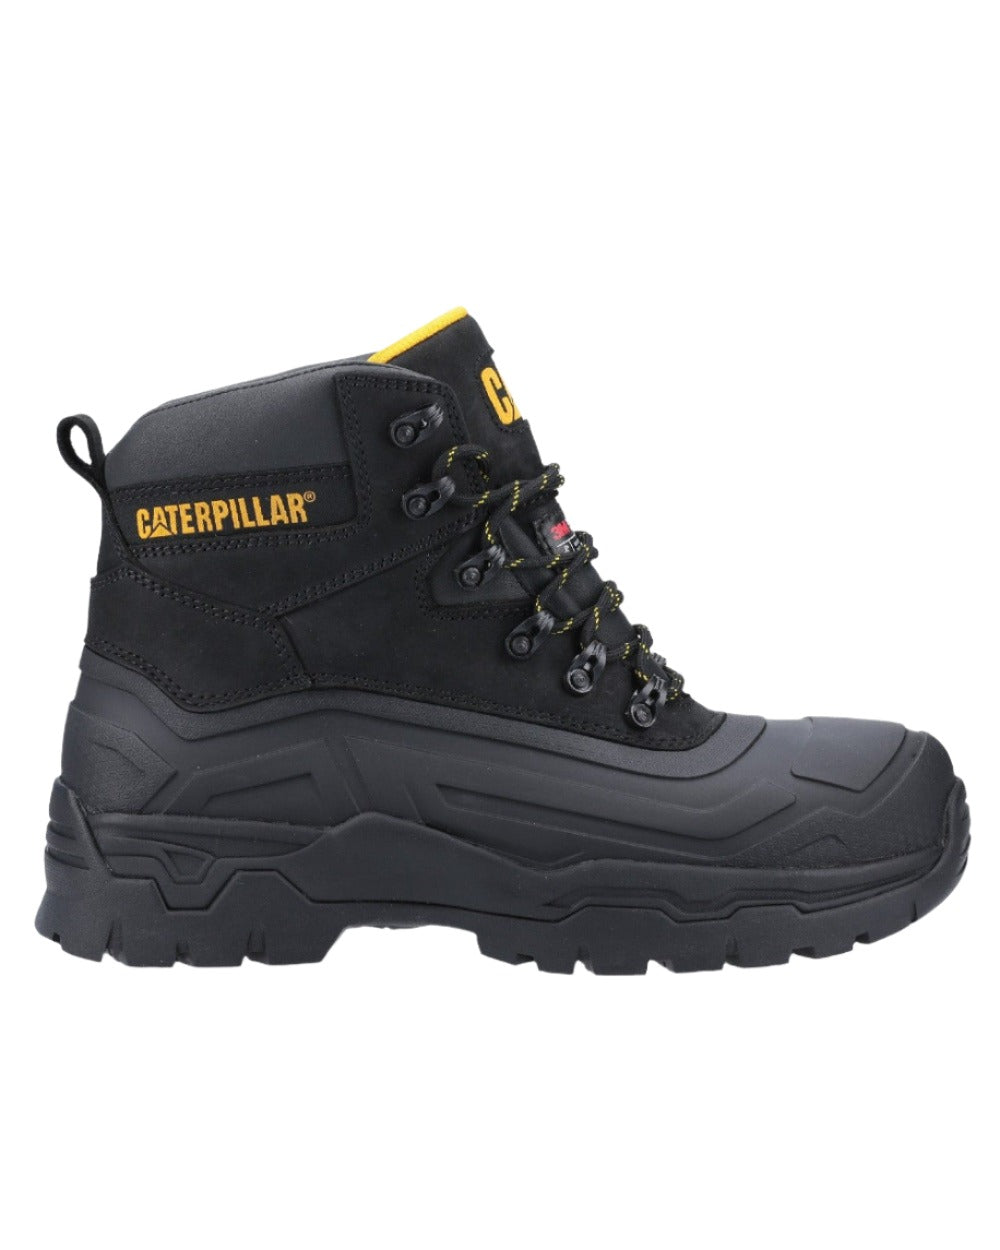 Black Coloured Caterpillar Typhoon SBH Safety Boot On A White Background